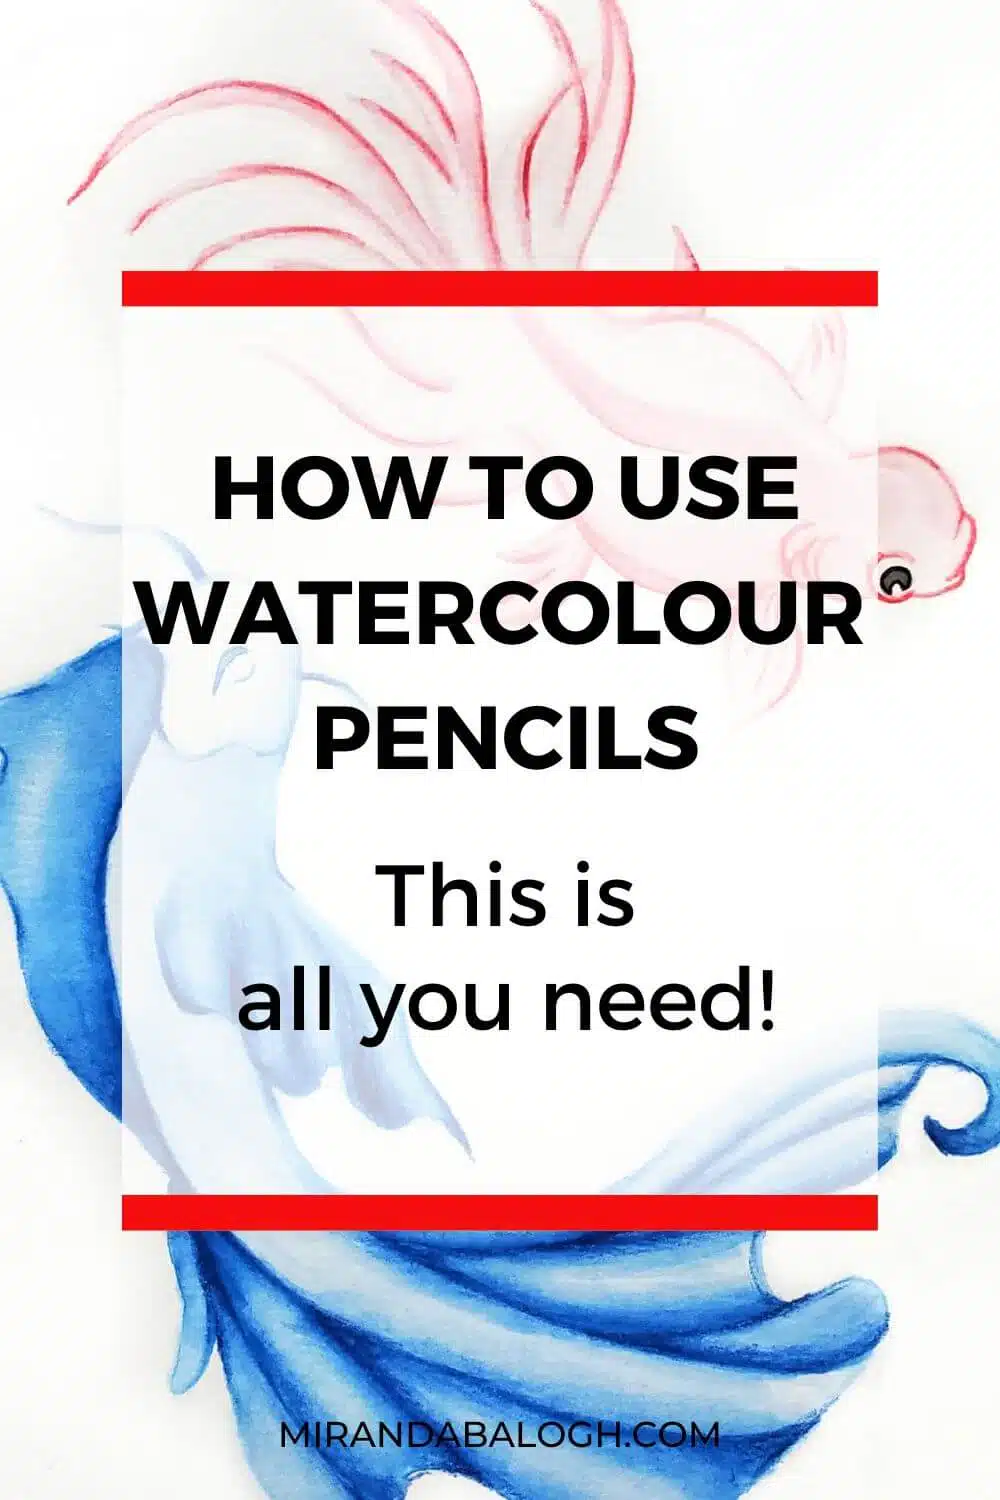 What is the difference between watercolour pencils and regular pencils? Well, coloured pencils are made with an oil or wax binder whereas watercolour pencils are water-soluble. That being said, how do you use watercolour pencils? There are many watercolour pencil techniques that use both wet and dry application. To learn more, check out this guide about watercolour pencils for beginners to discover why you should create art with them.